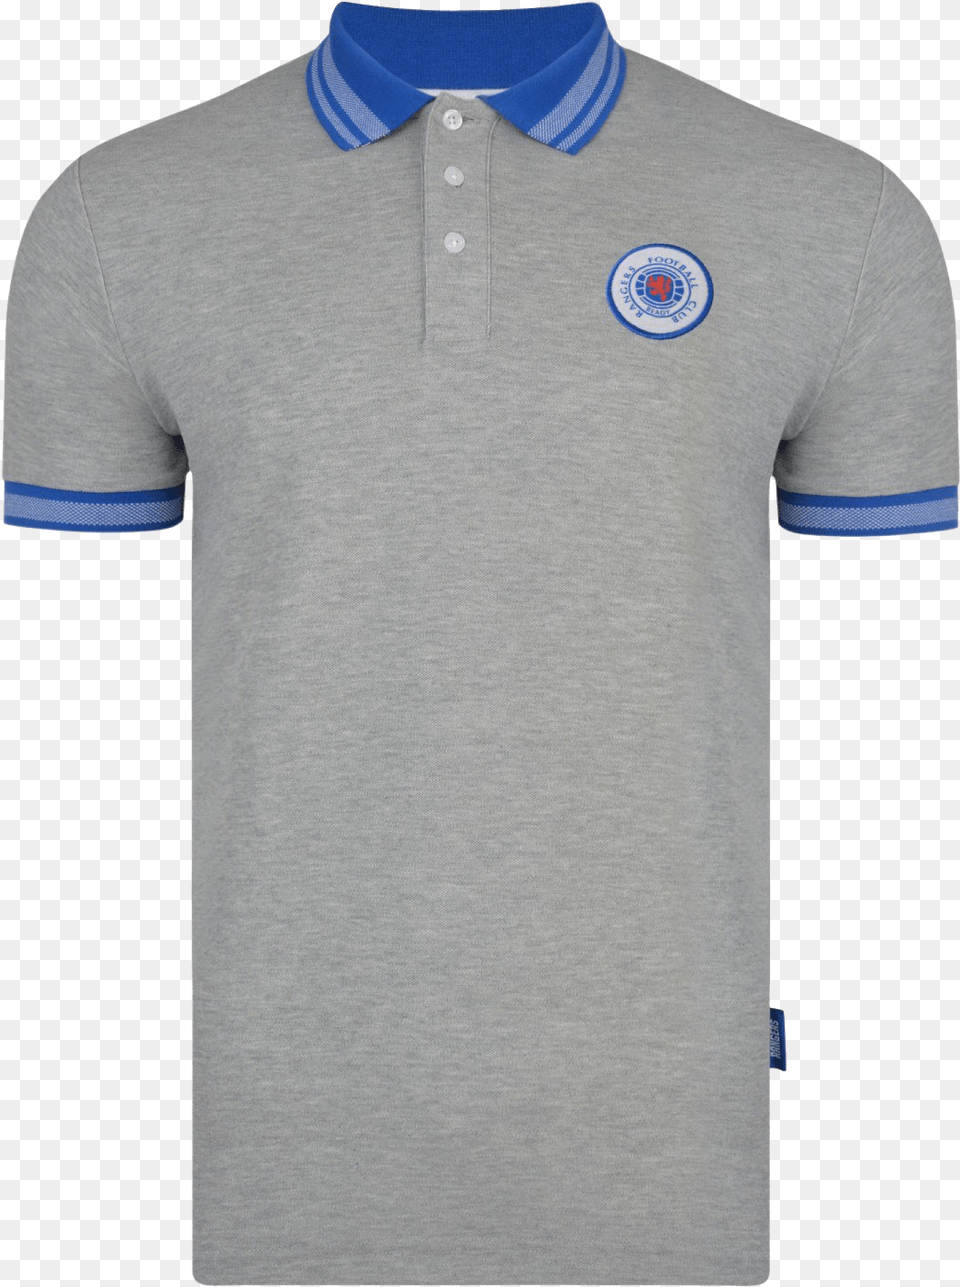 Grey And Blue T Shirt Polo, Clothing, T-shirt, Animal, Team Png